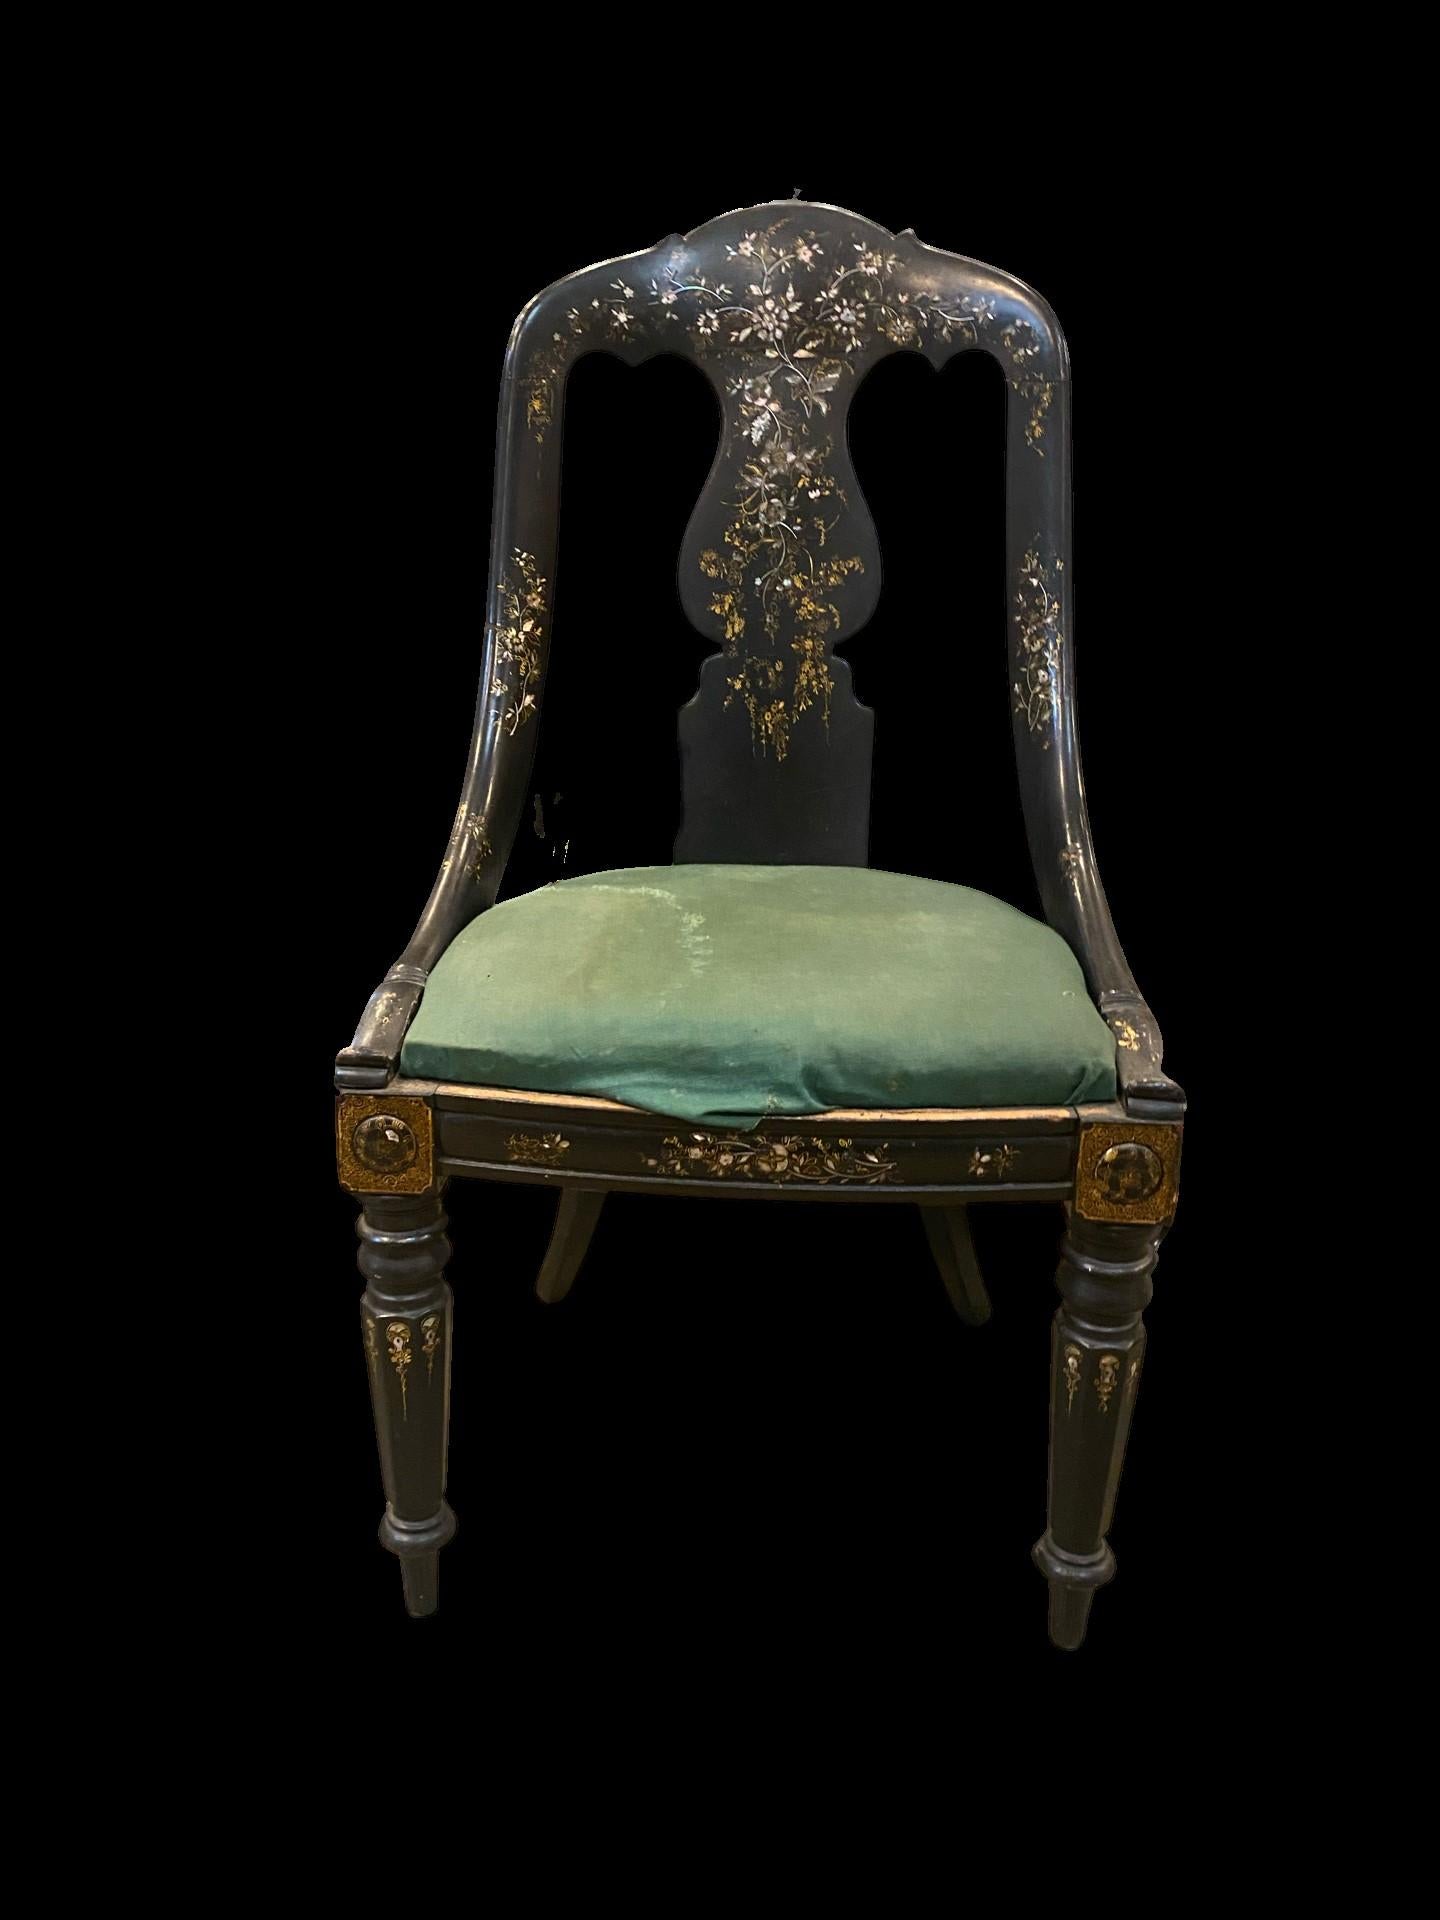 19th Century Papier-mâché Chair with Gold Leaf Detail and Mother of Pearl Inlay For Sale 1